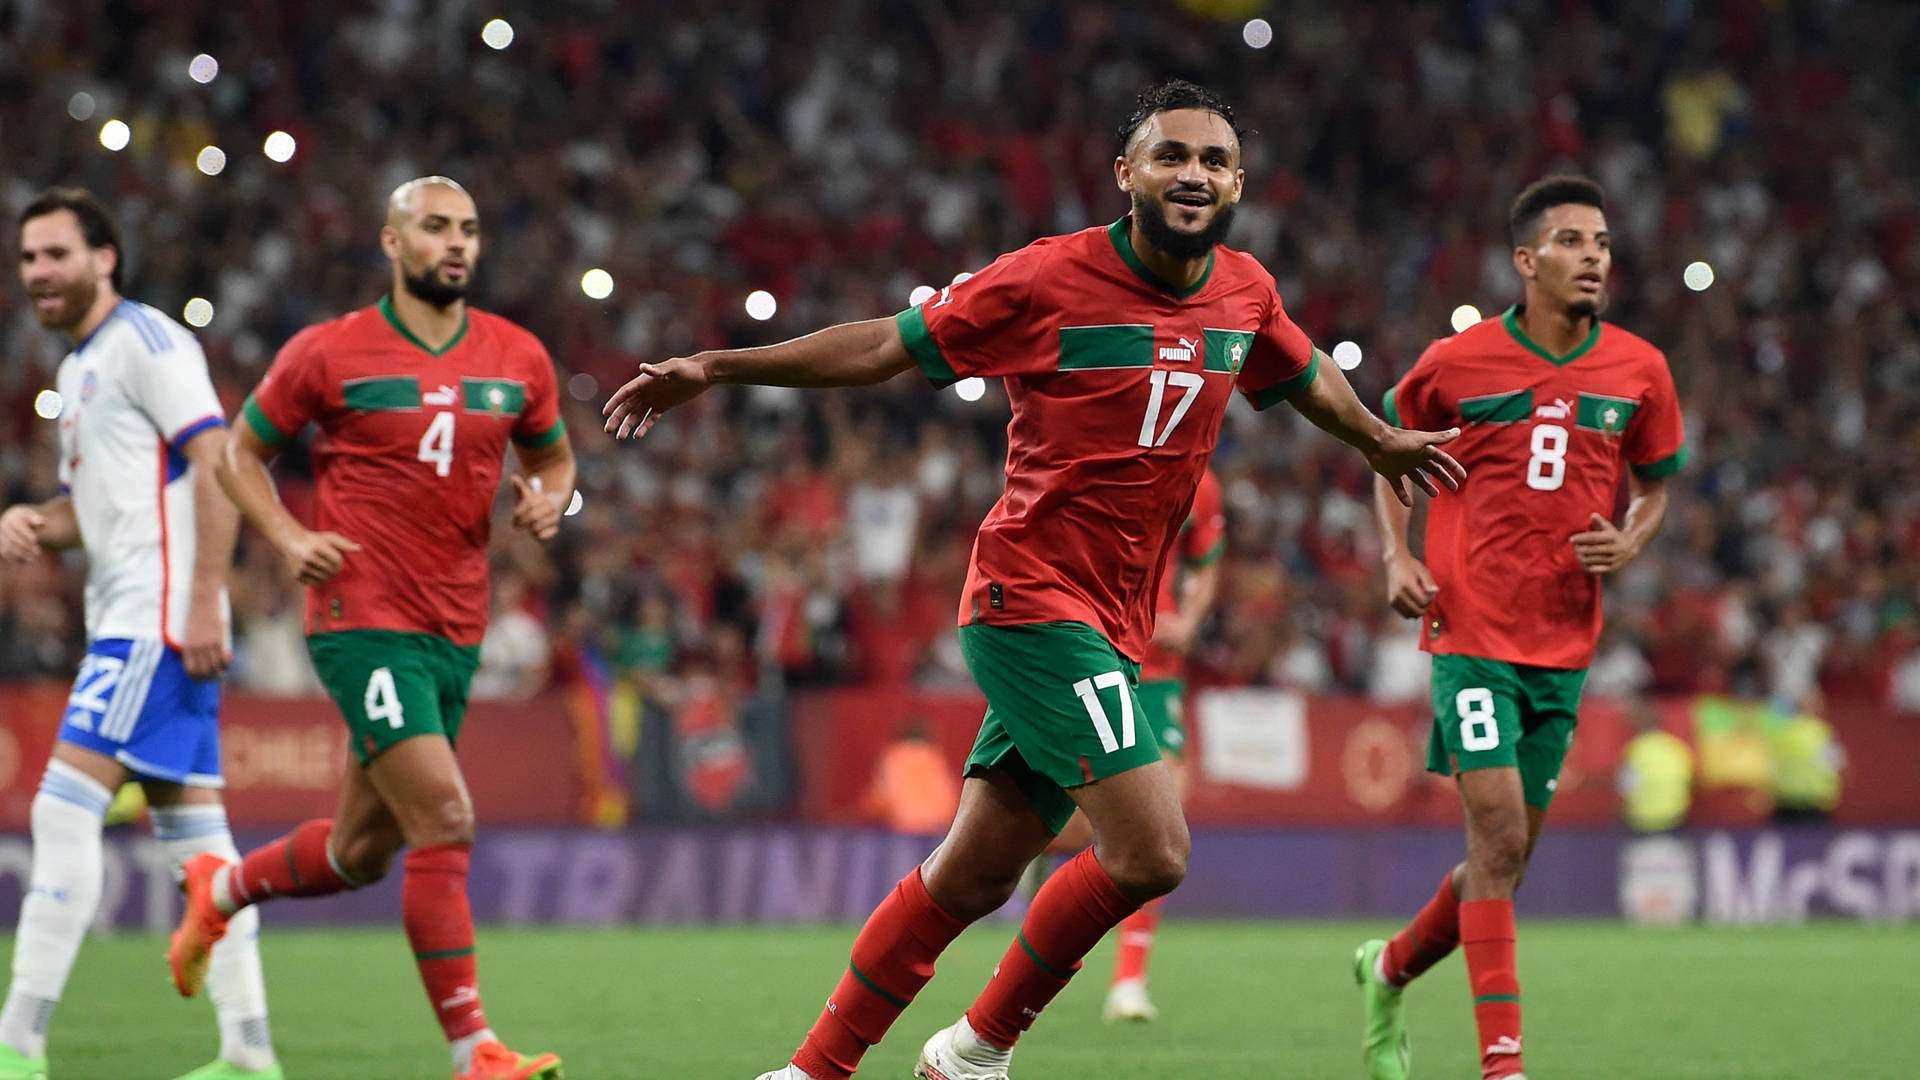 Free Morocco National Football Team Wallpaper Downloads, Morocco National Football Team Wallpaper for FREE